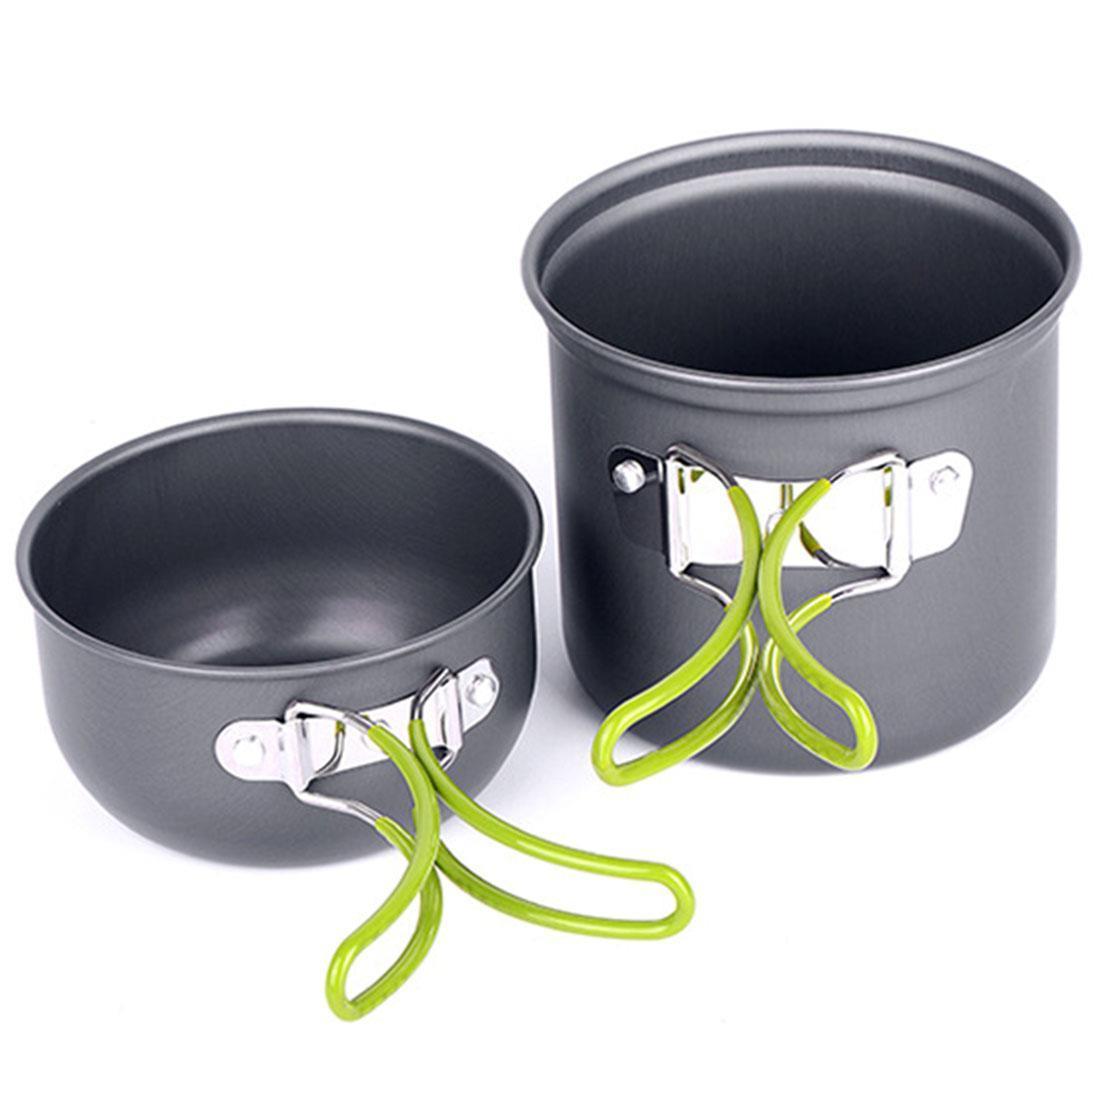 Nesting Pot & Pan for Camping With Foldable Handles -2 pieces